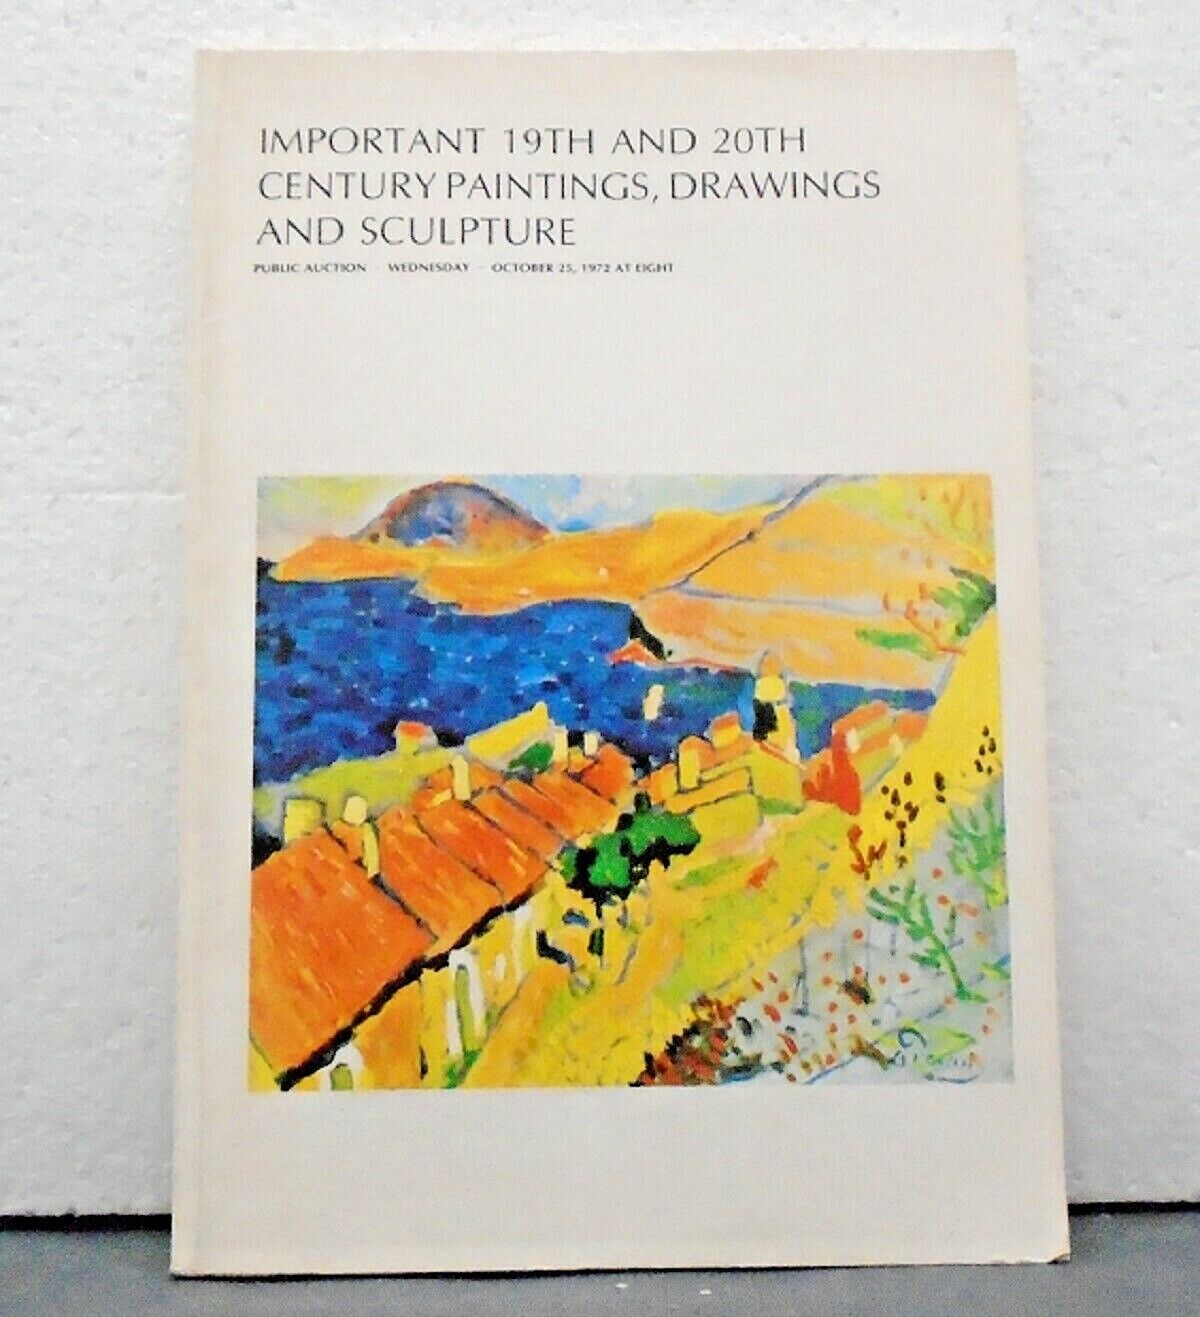 IMPORTANT 19th & 20th CENTURY PAINTINGS - PUBLIC AUCTION BOOKLET 1972 NEW YORK